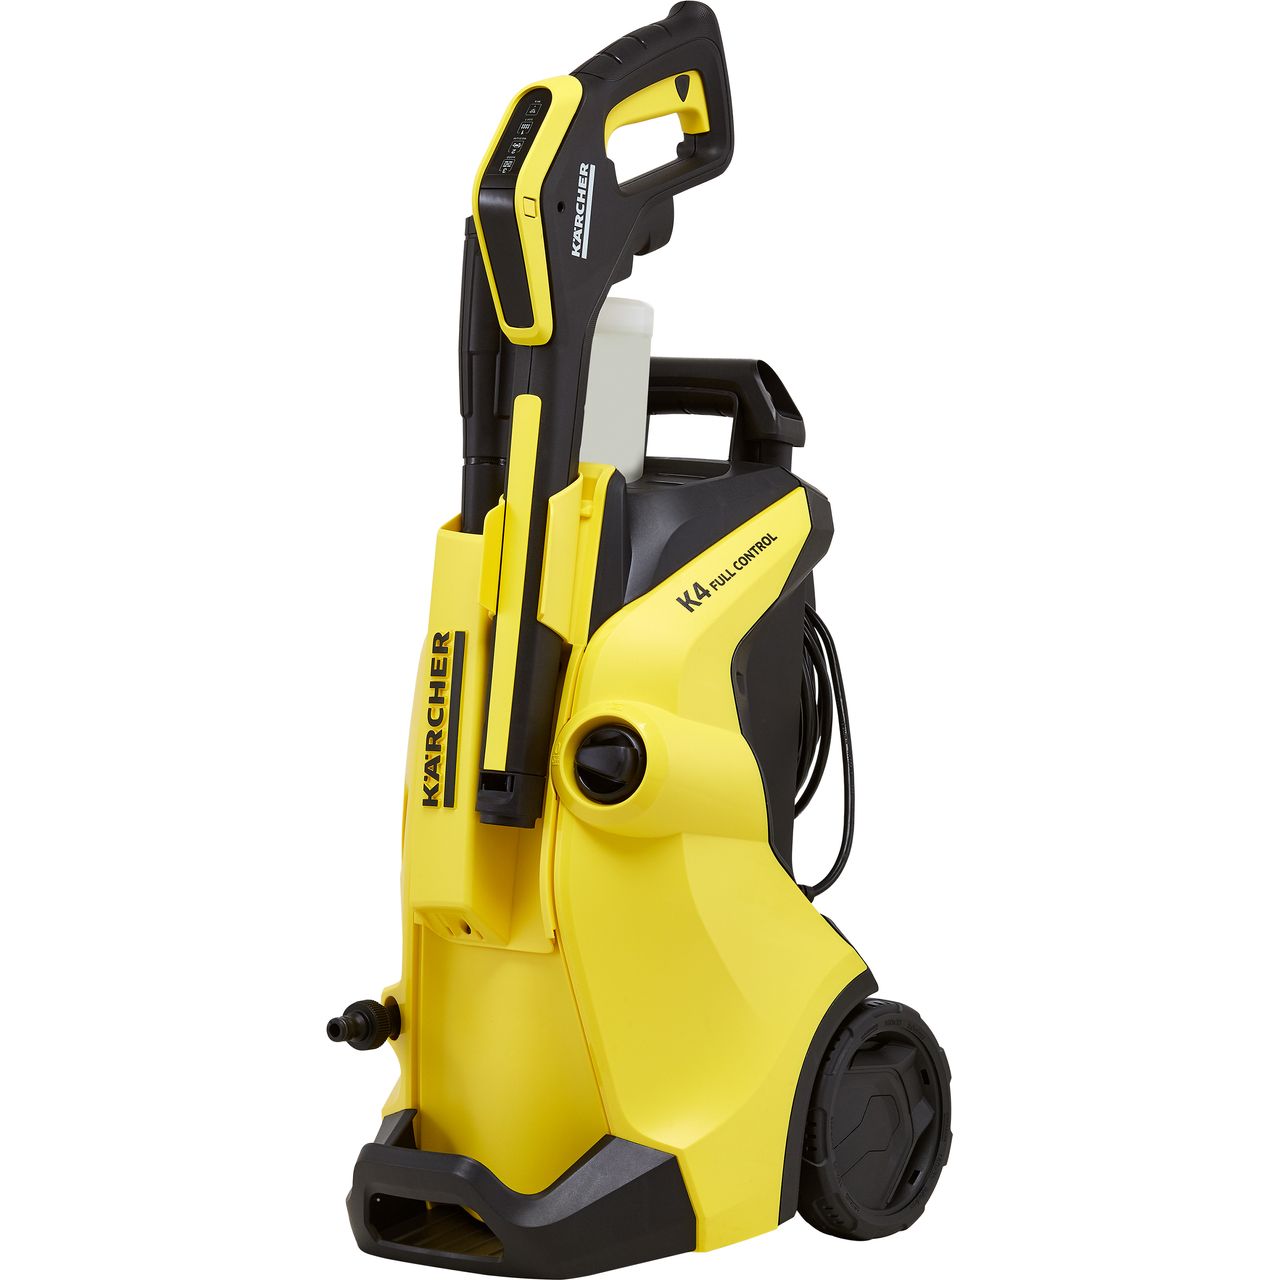 Karcher K4 Full Control Home Pressure Washer with T350 Patio Cleaner 130 bar 641113714059 eBay